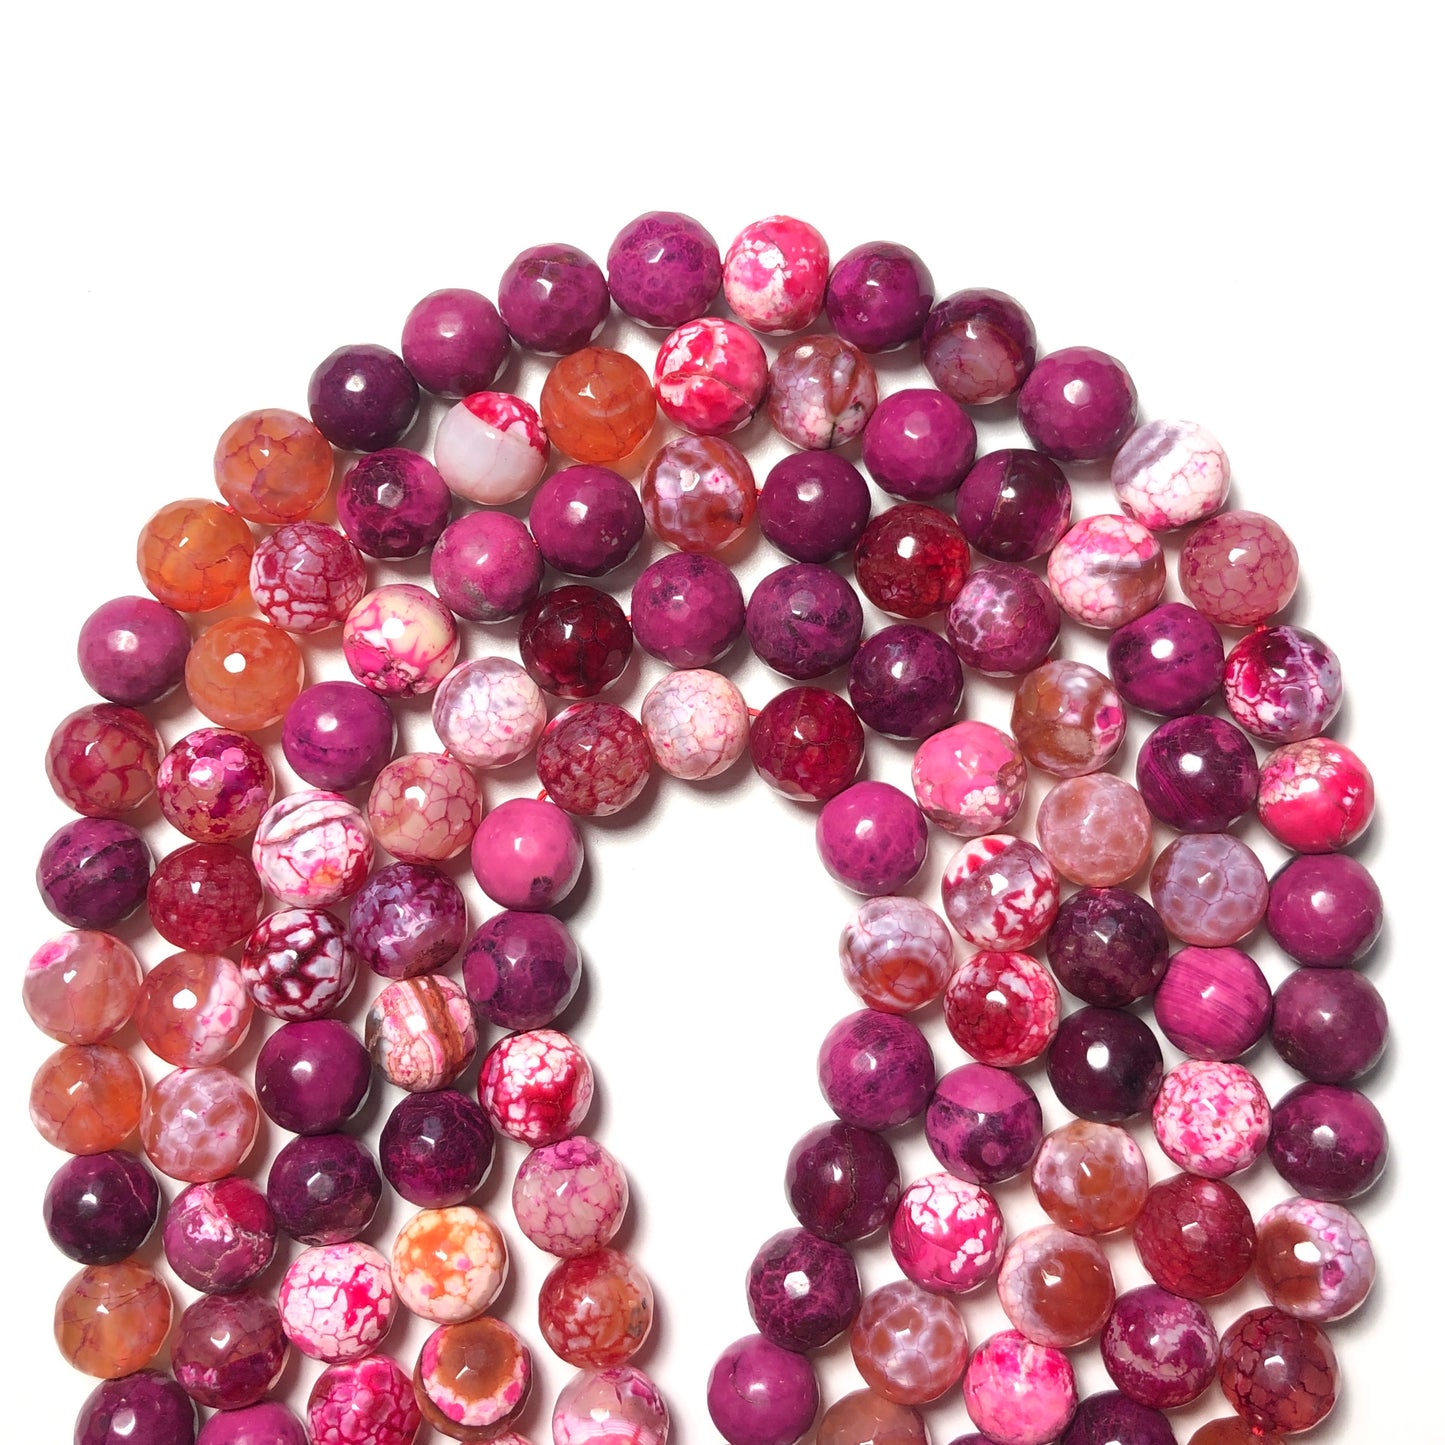 2 Strands/lot 12mm Fuchsia Faceted Fire Agate Stone Beads Stone Beads 12mm Stone Beads Breast Cancer Awareness Faceted Agate Beads New Beads Arrivals Charms Beads Beyond